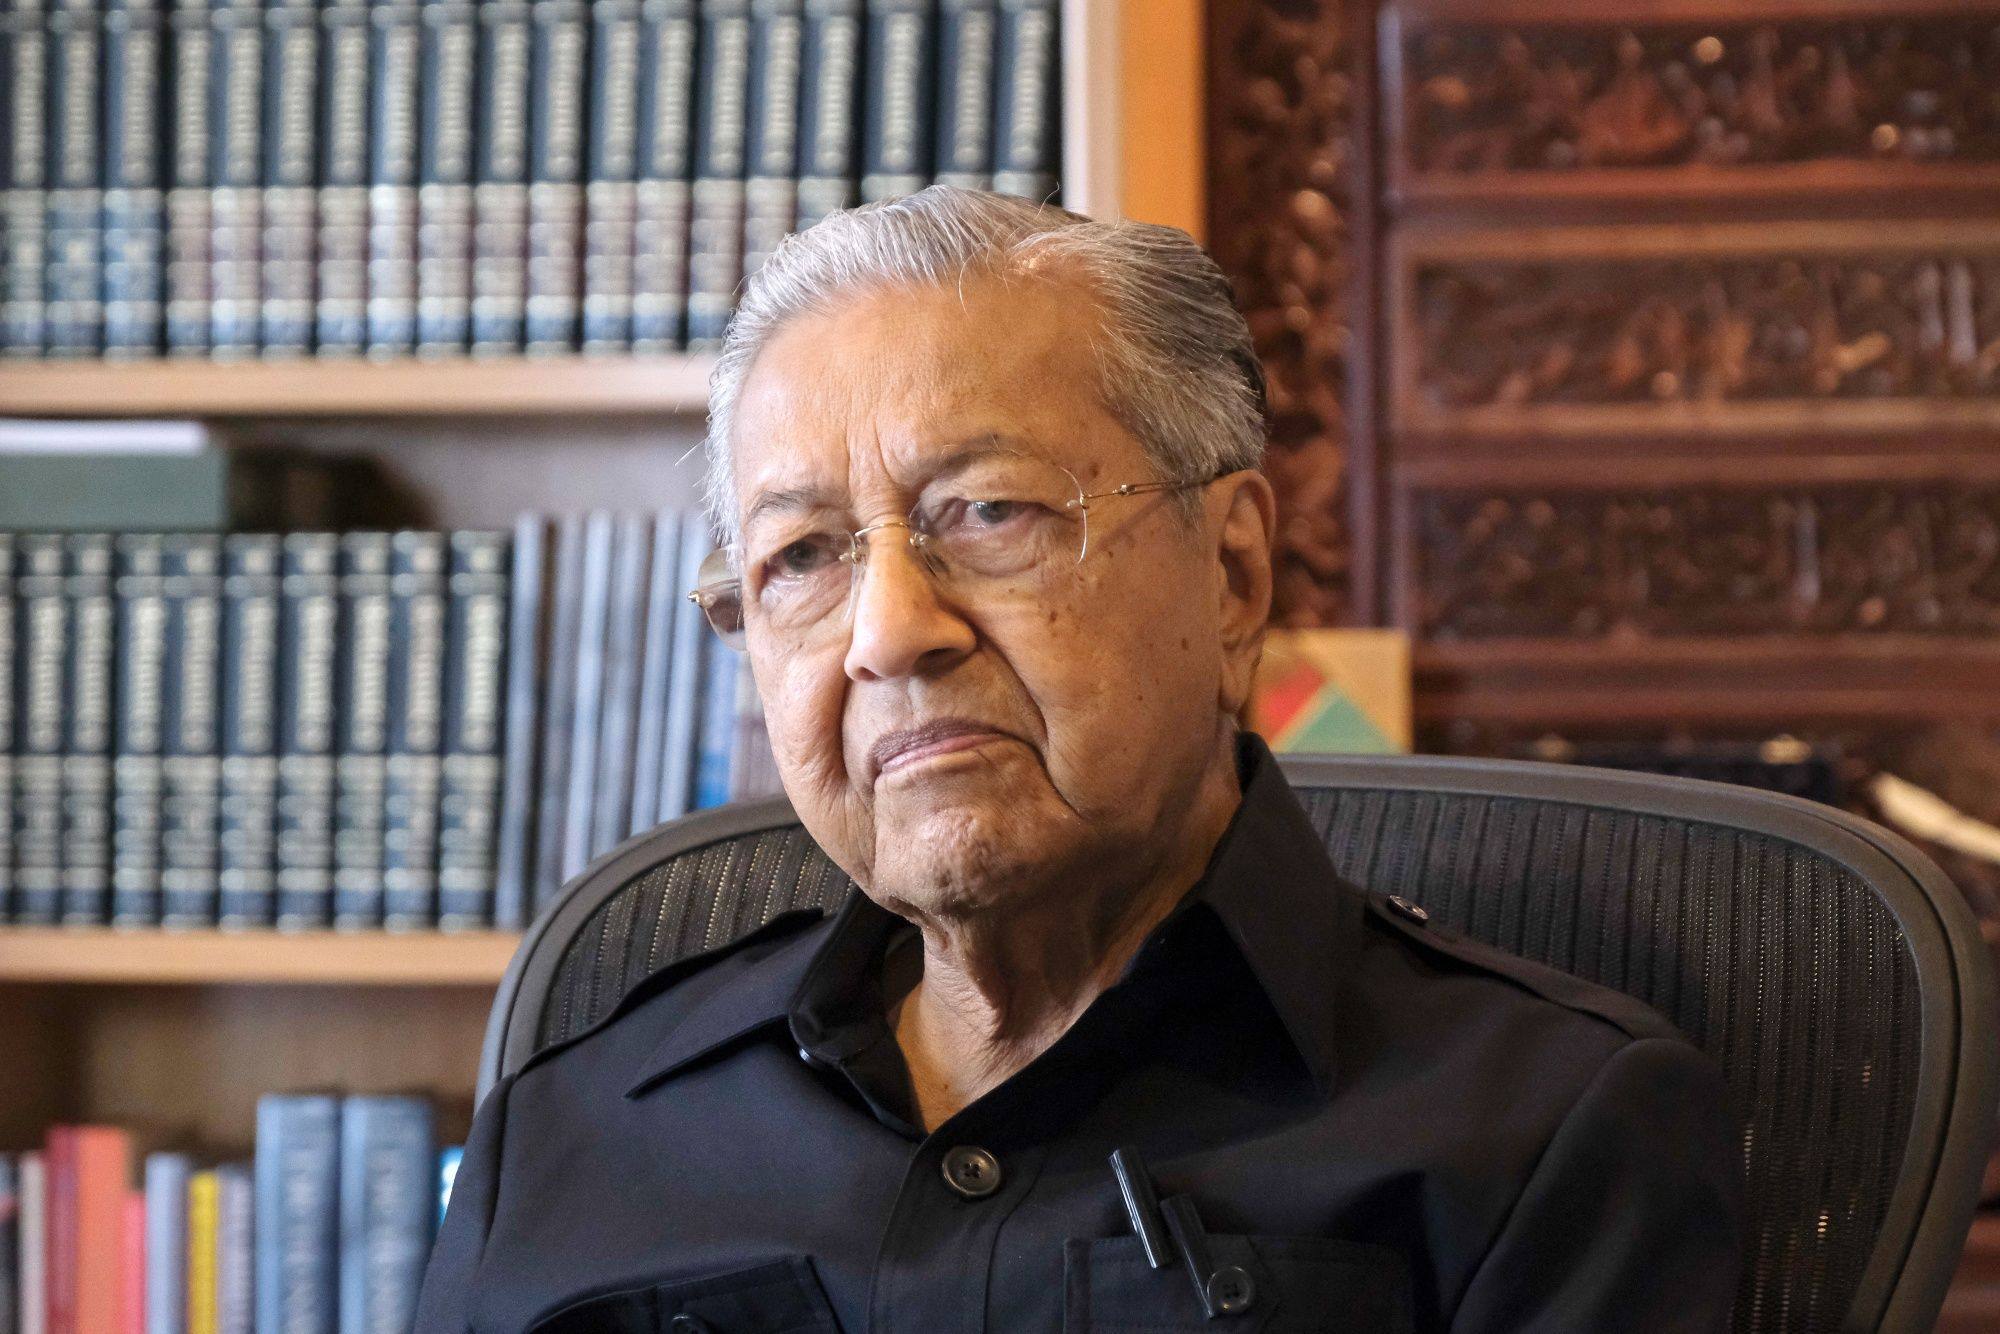 Mahathir has a long record of going after leaders who he deems have failed to uphold the rights and privileges of the Malays. Photo: Bloomberg